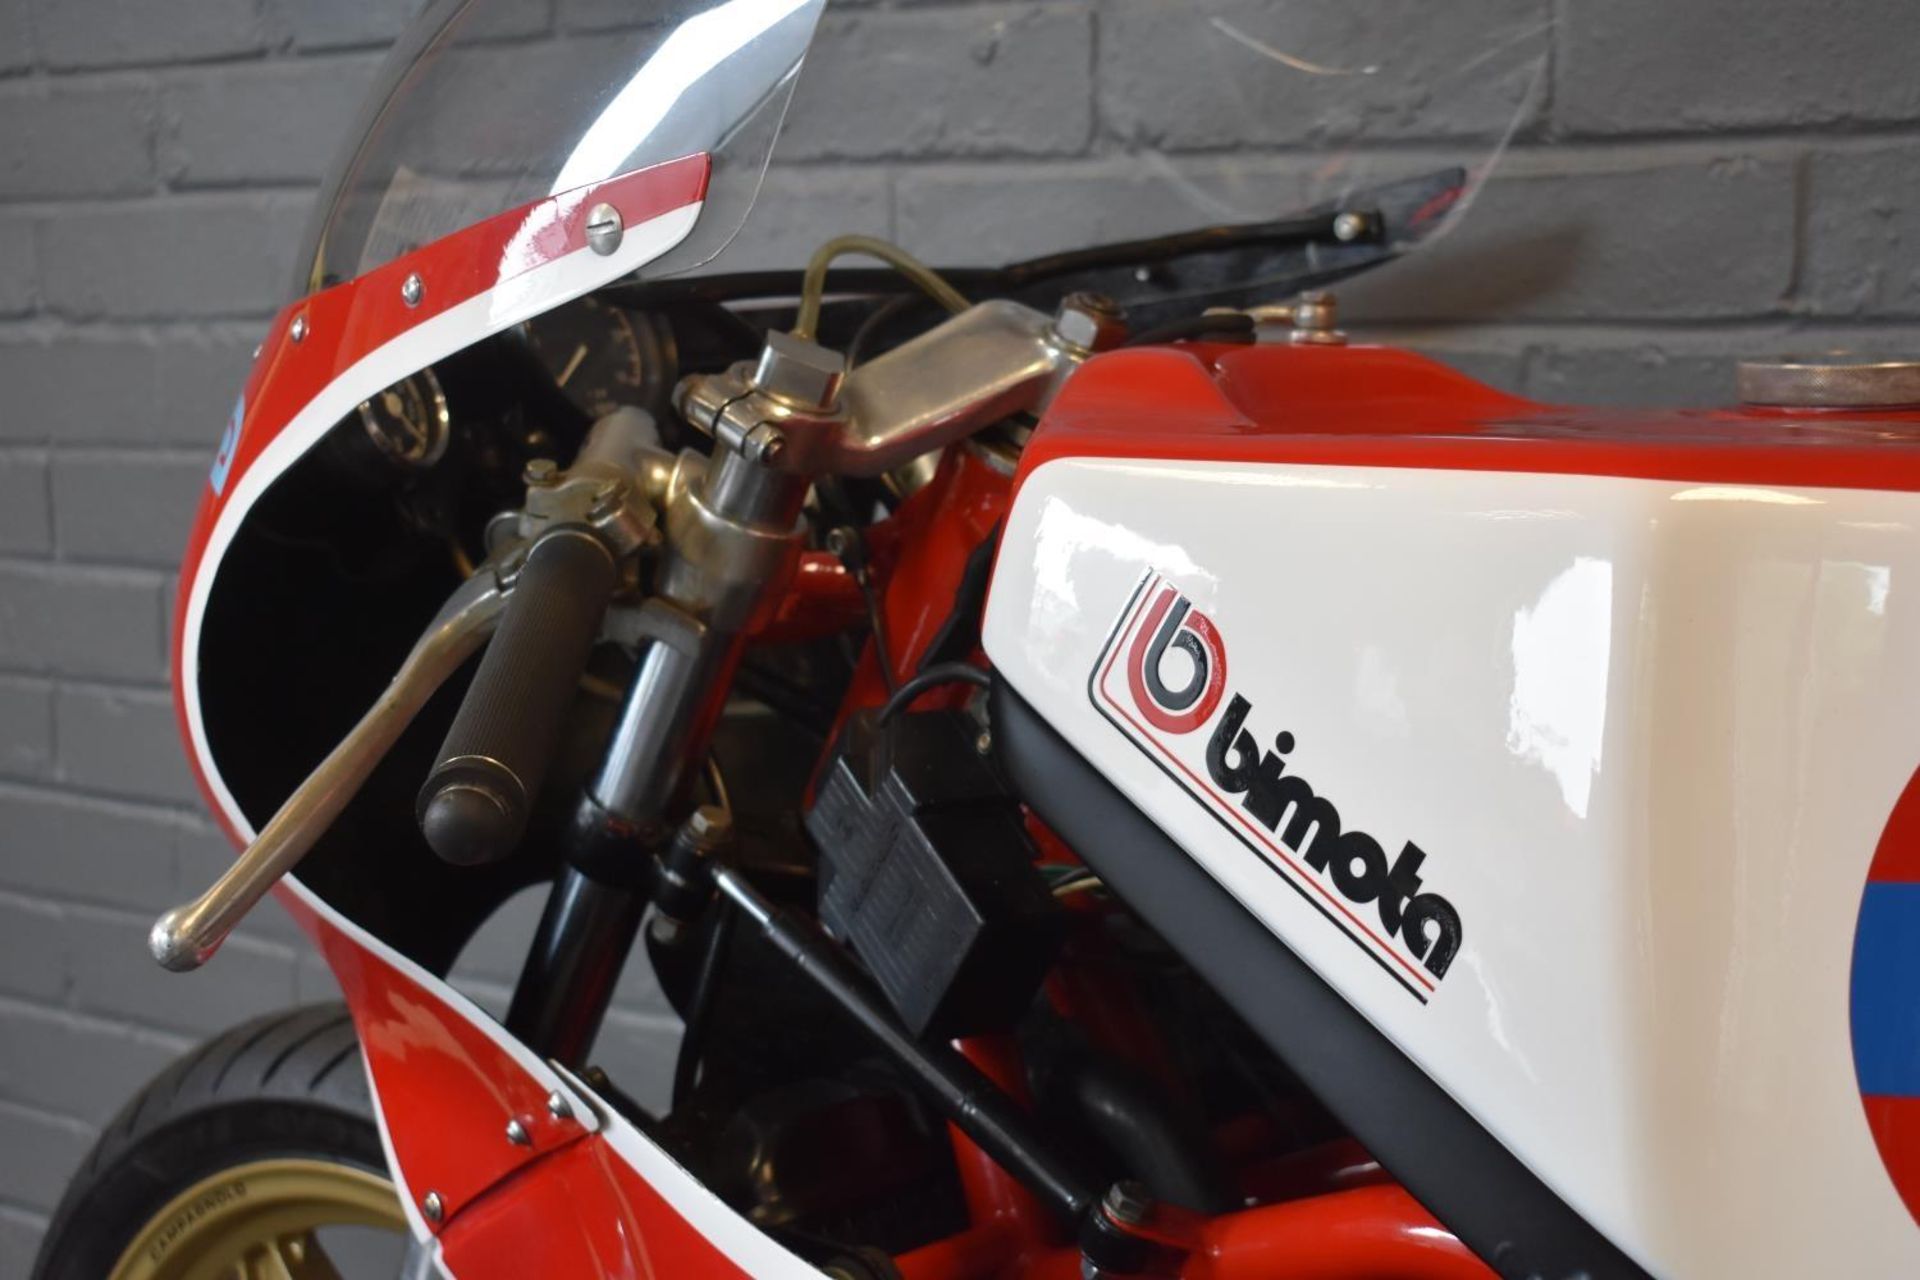 A 1977 Bimota YB1, unregistered, red/white and blue. This Bimota has formed part of a significant - Image 5 of 6